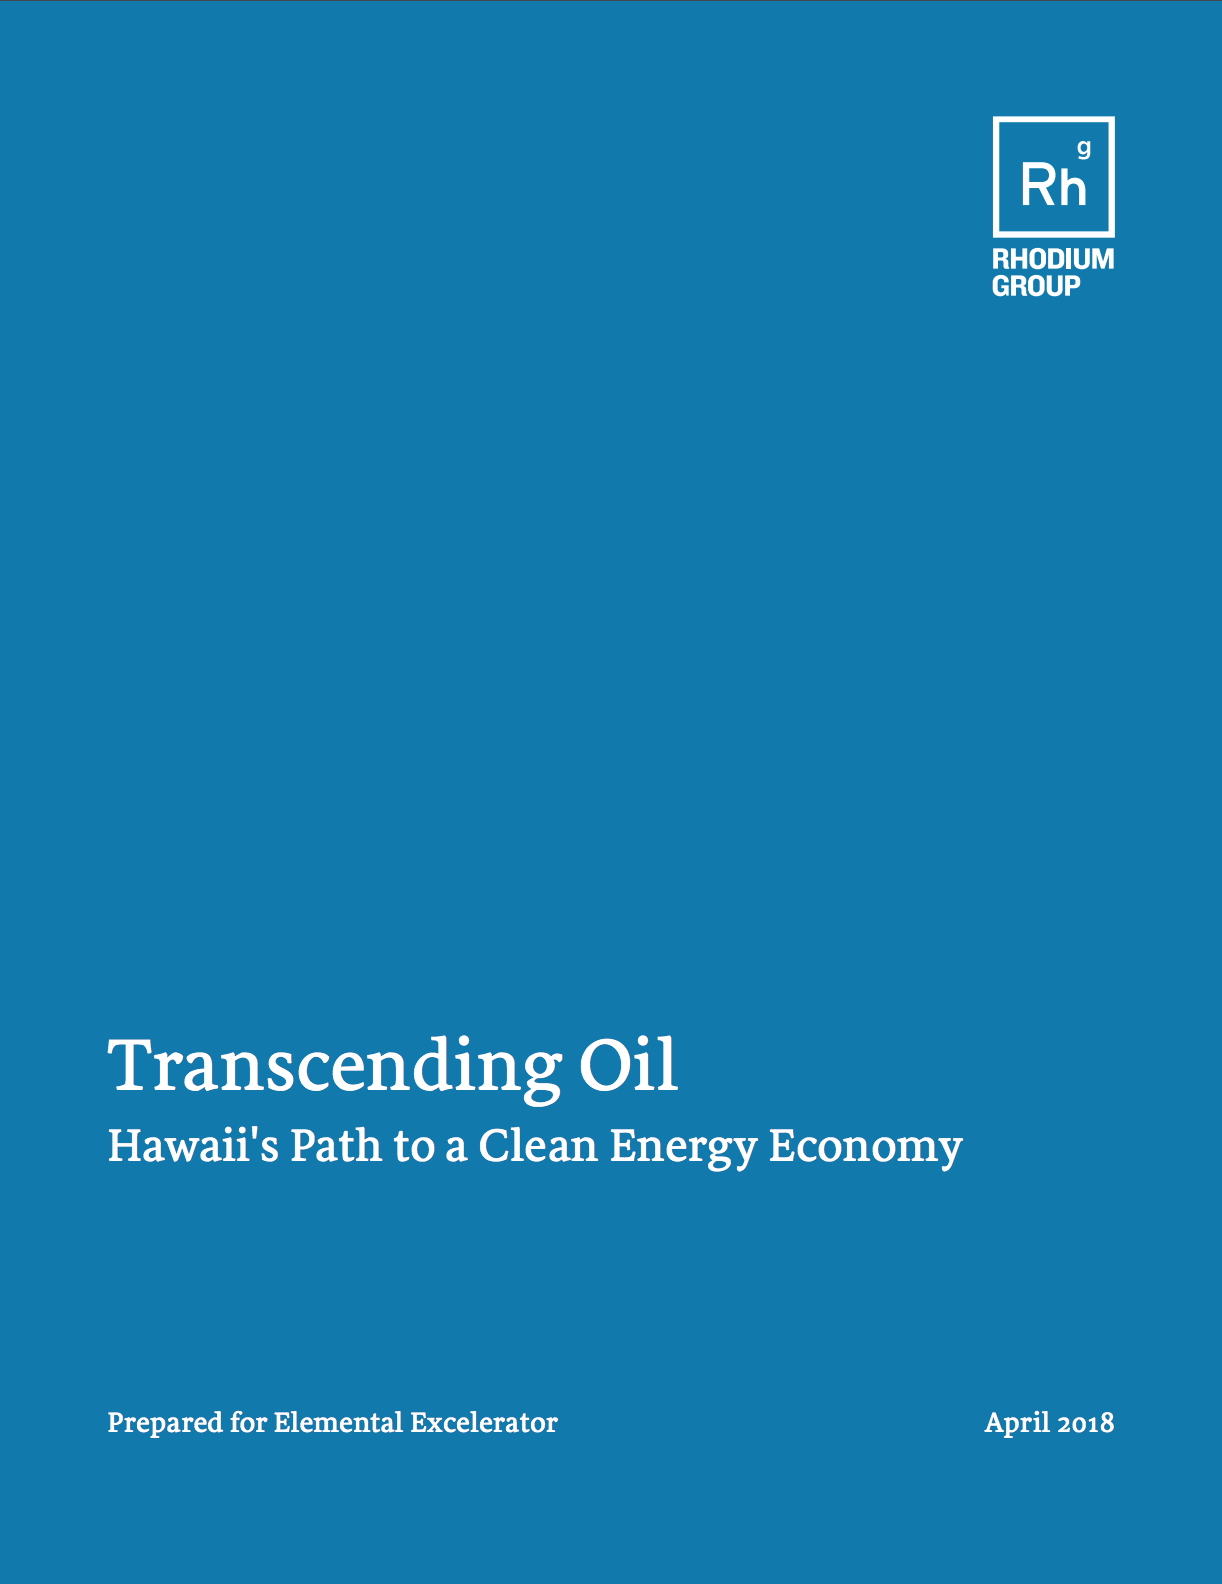 Transcending Oil: Hawaii’s Path to a Clean Energy Economy